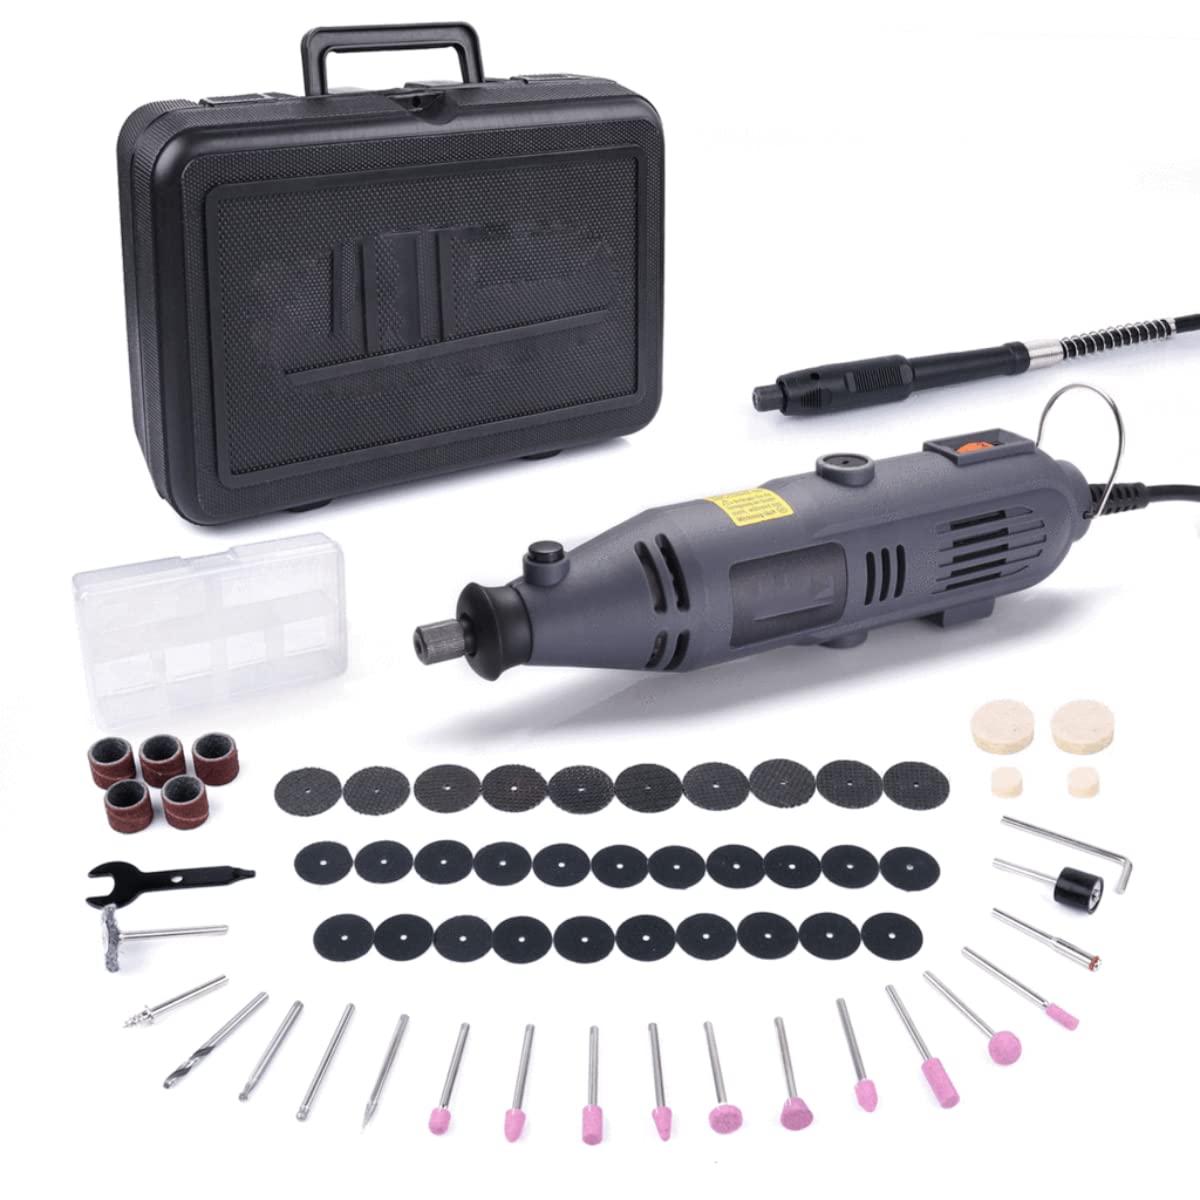 Rotary Tool with Flex Shaft, 135W Power Variable Speed and 60 Accessories Perfect for Home Improvement and Crafting Projects